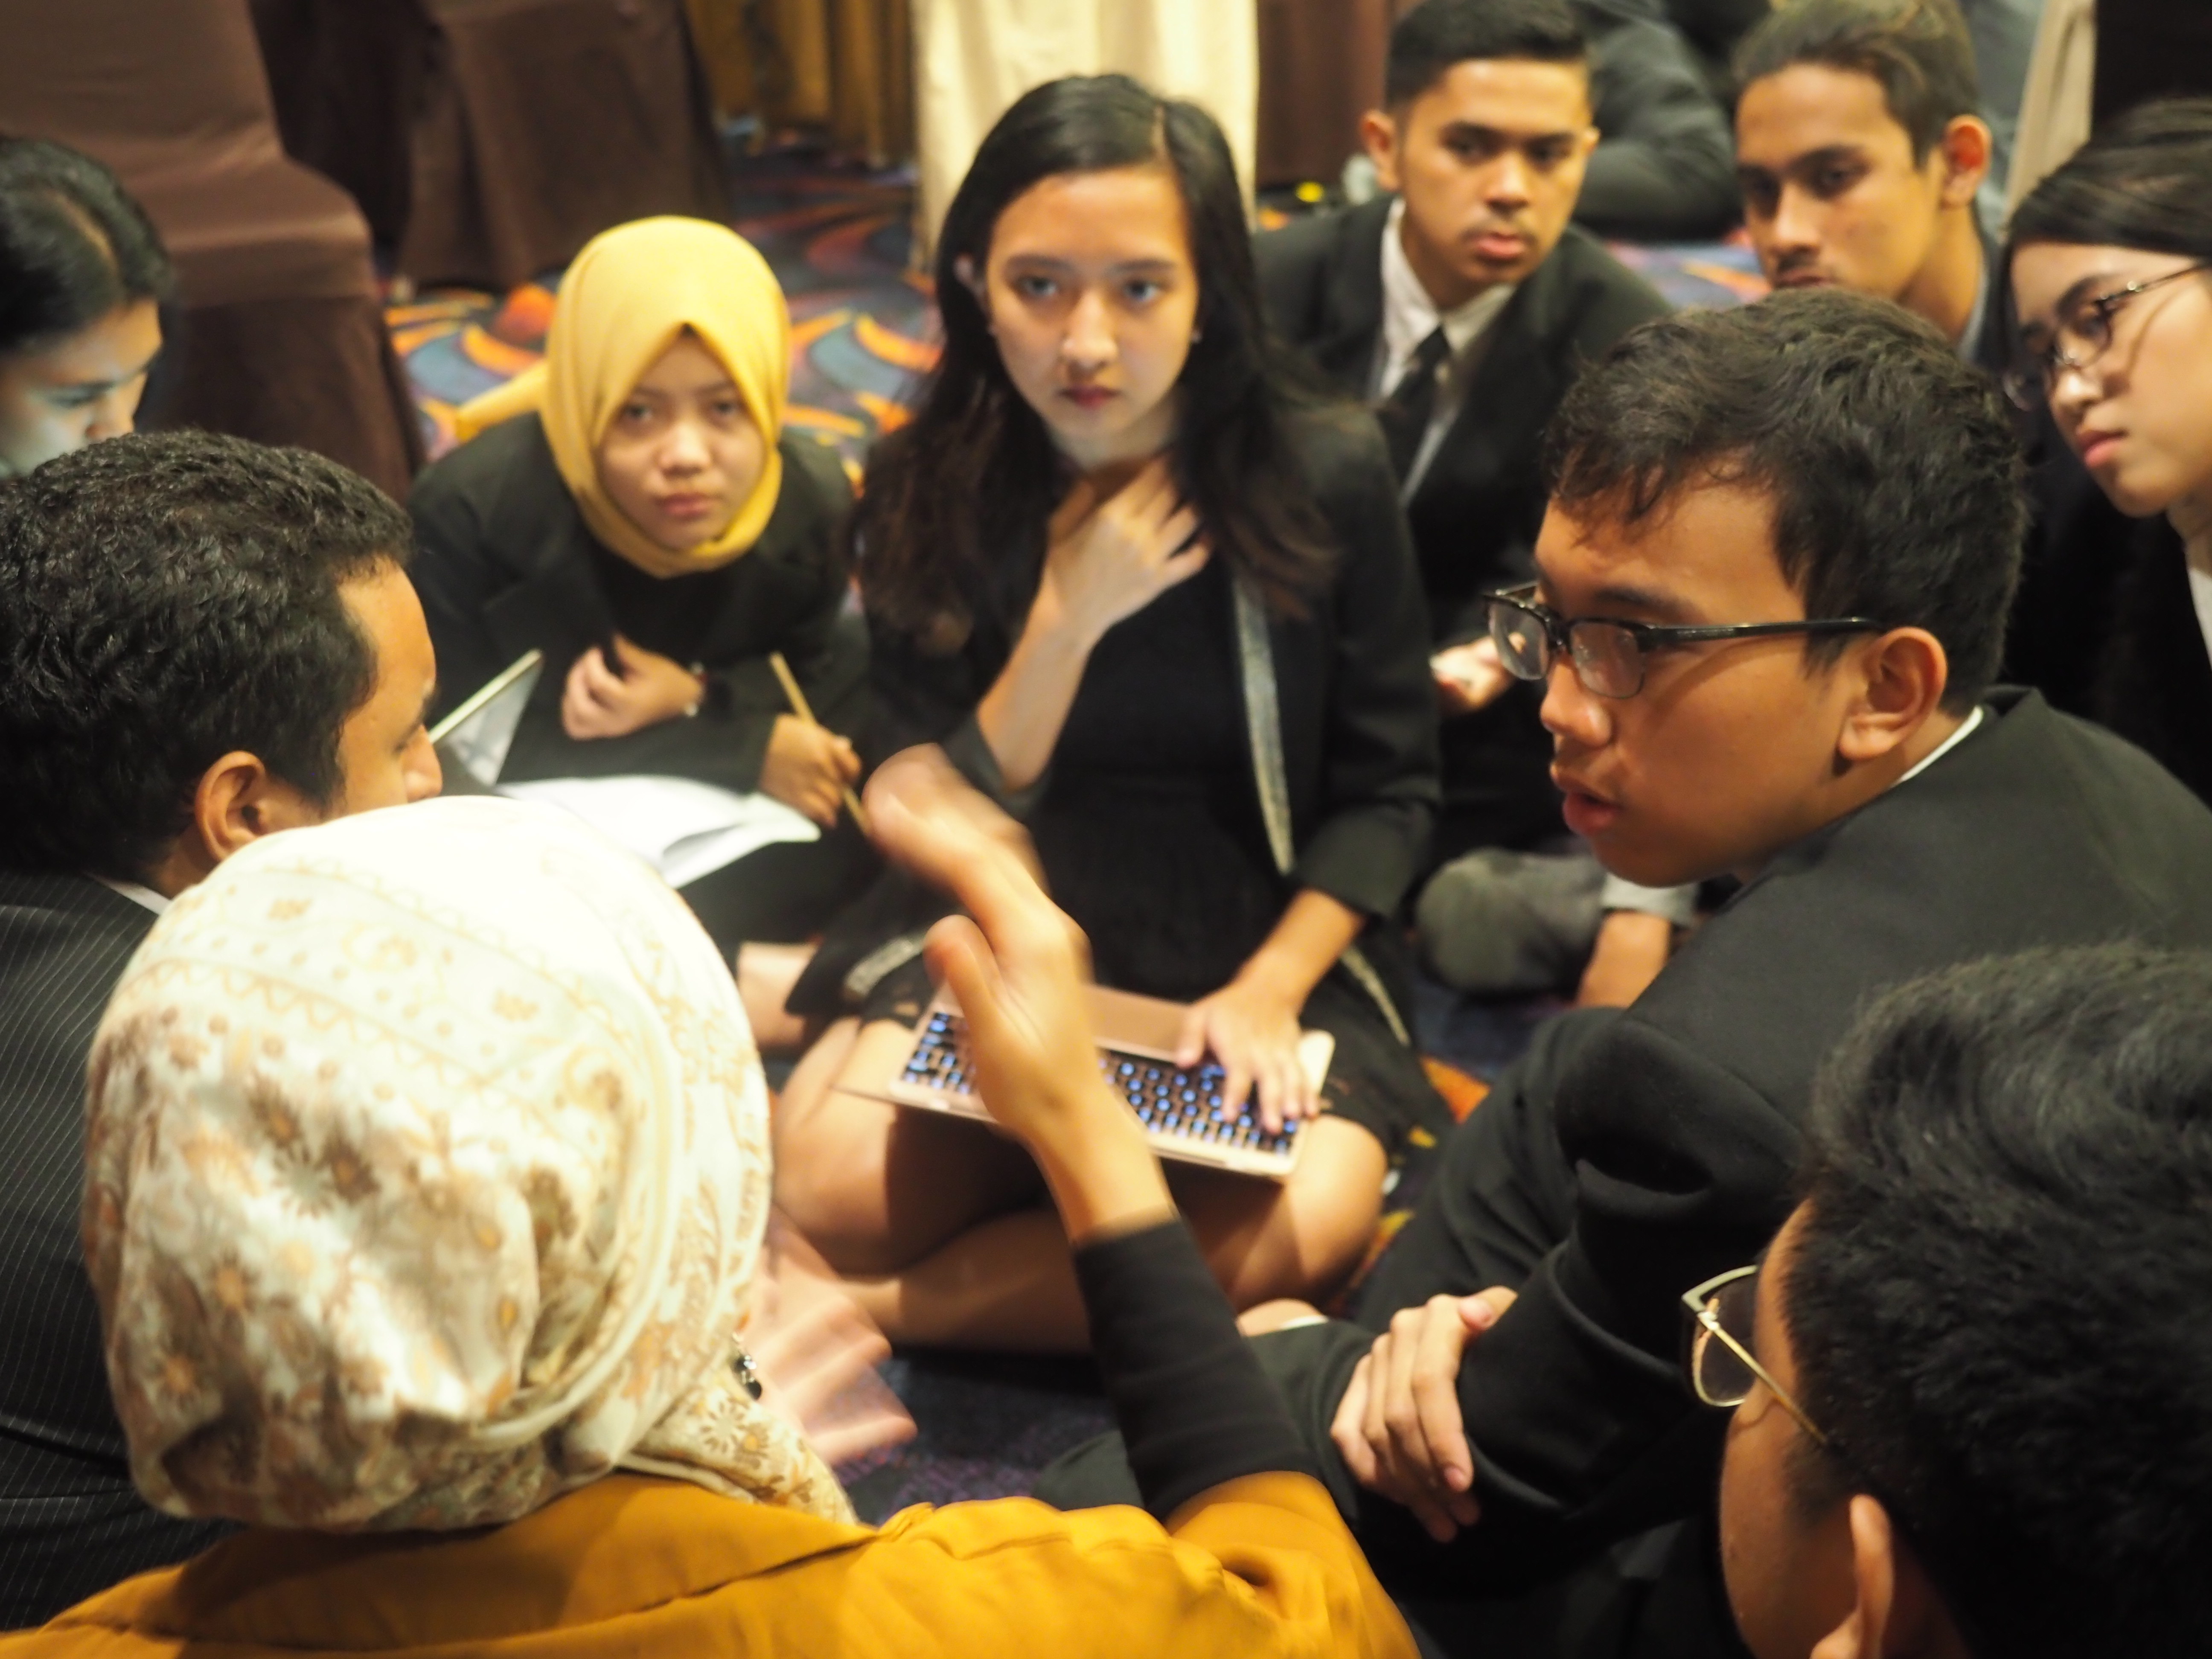 Unmoderated Caucus MUN Climate Conference, Bintaro, 19-21 March 2019